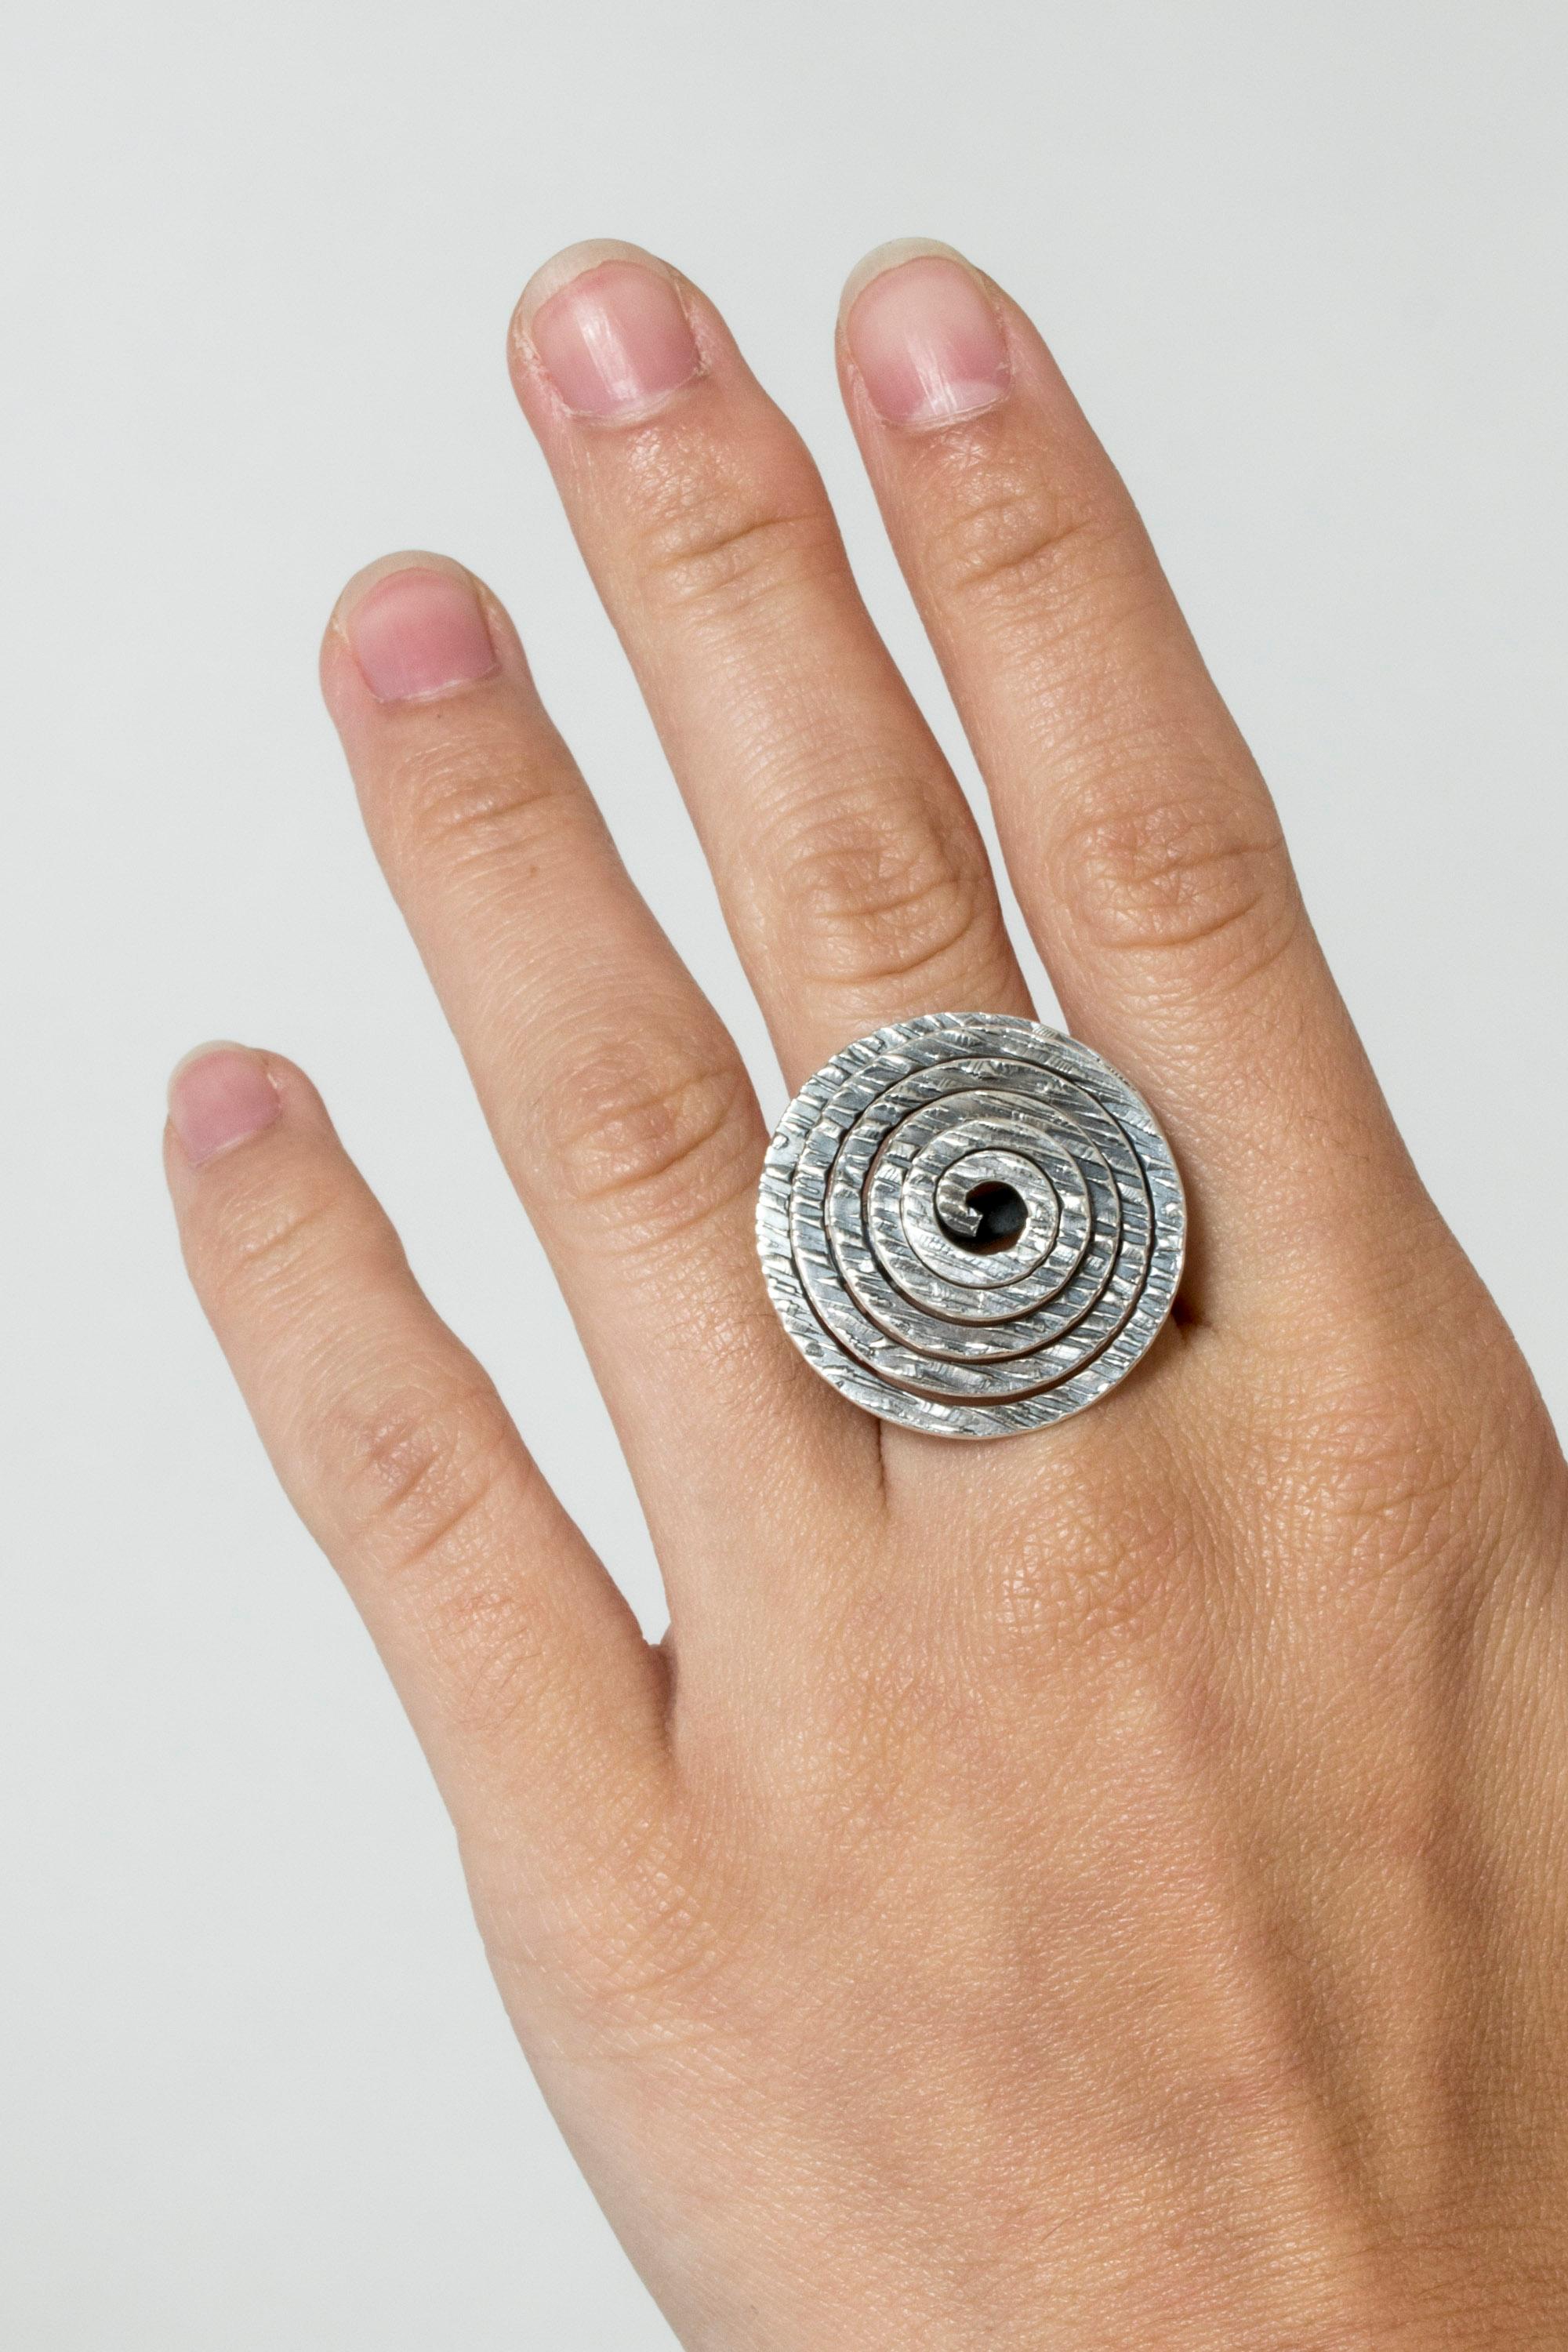 Amazing, expressive silver ring by Elis Kauppi, with a large silver spiral. The surface of the spiral is ethched with an organic pattern.